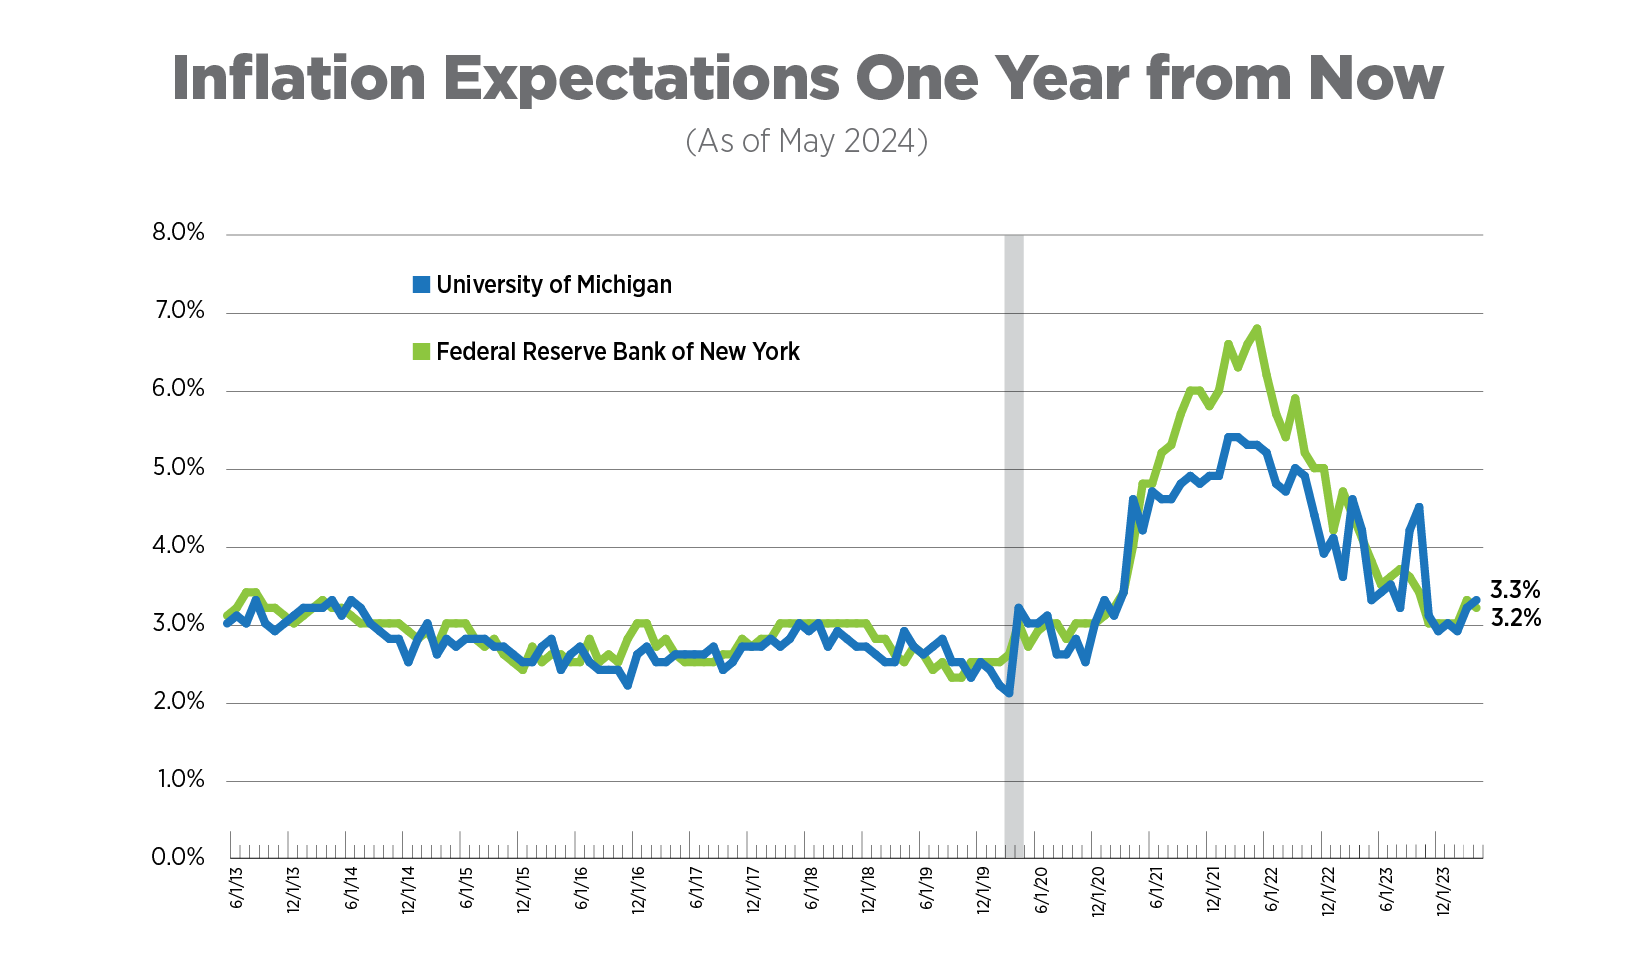 inflation expectations one year from now (as of may 2024)